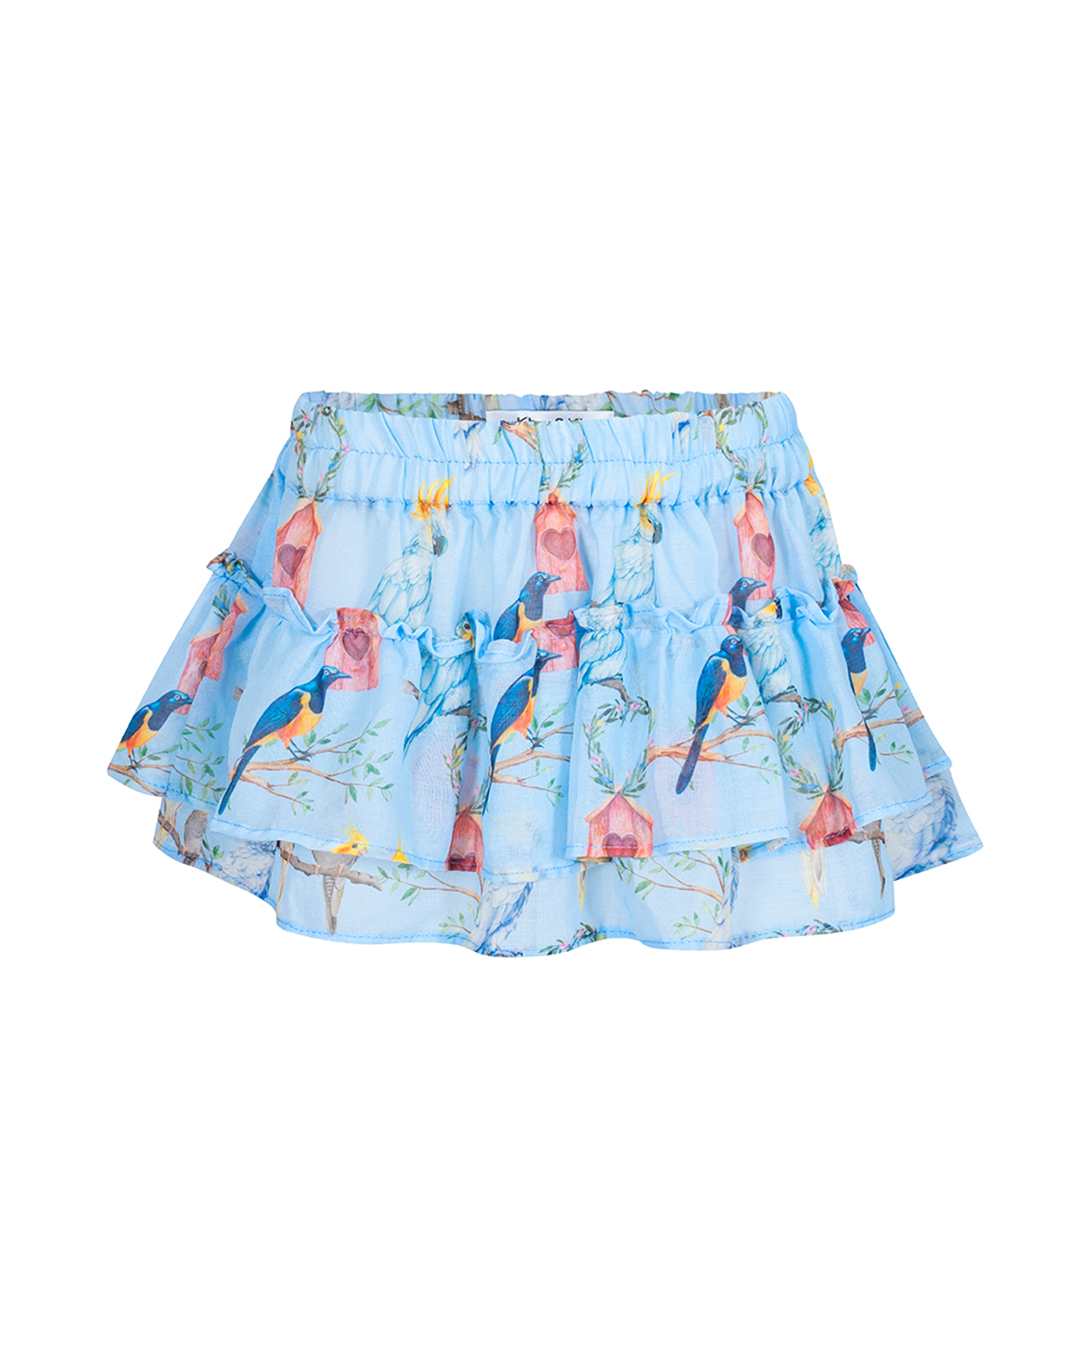 COCKATOO IN BLUE SKIRT